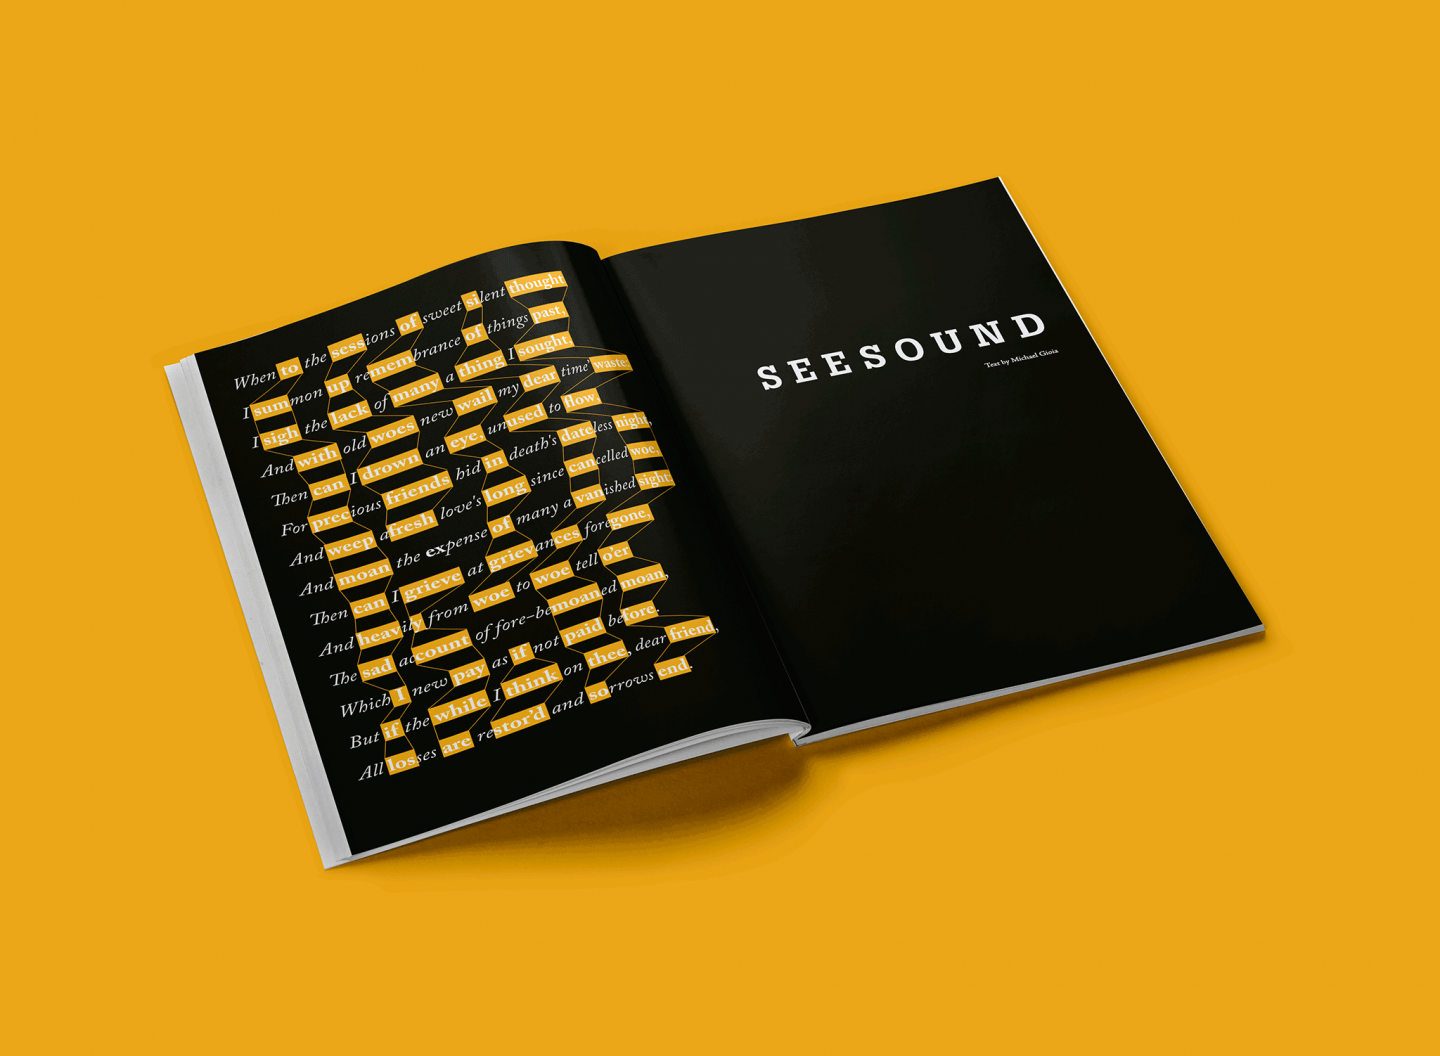 Our Magazine- See Sound